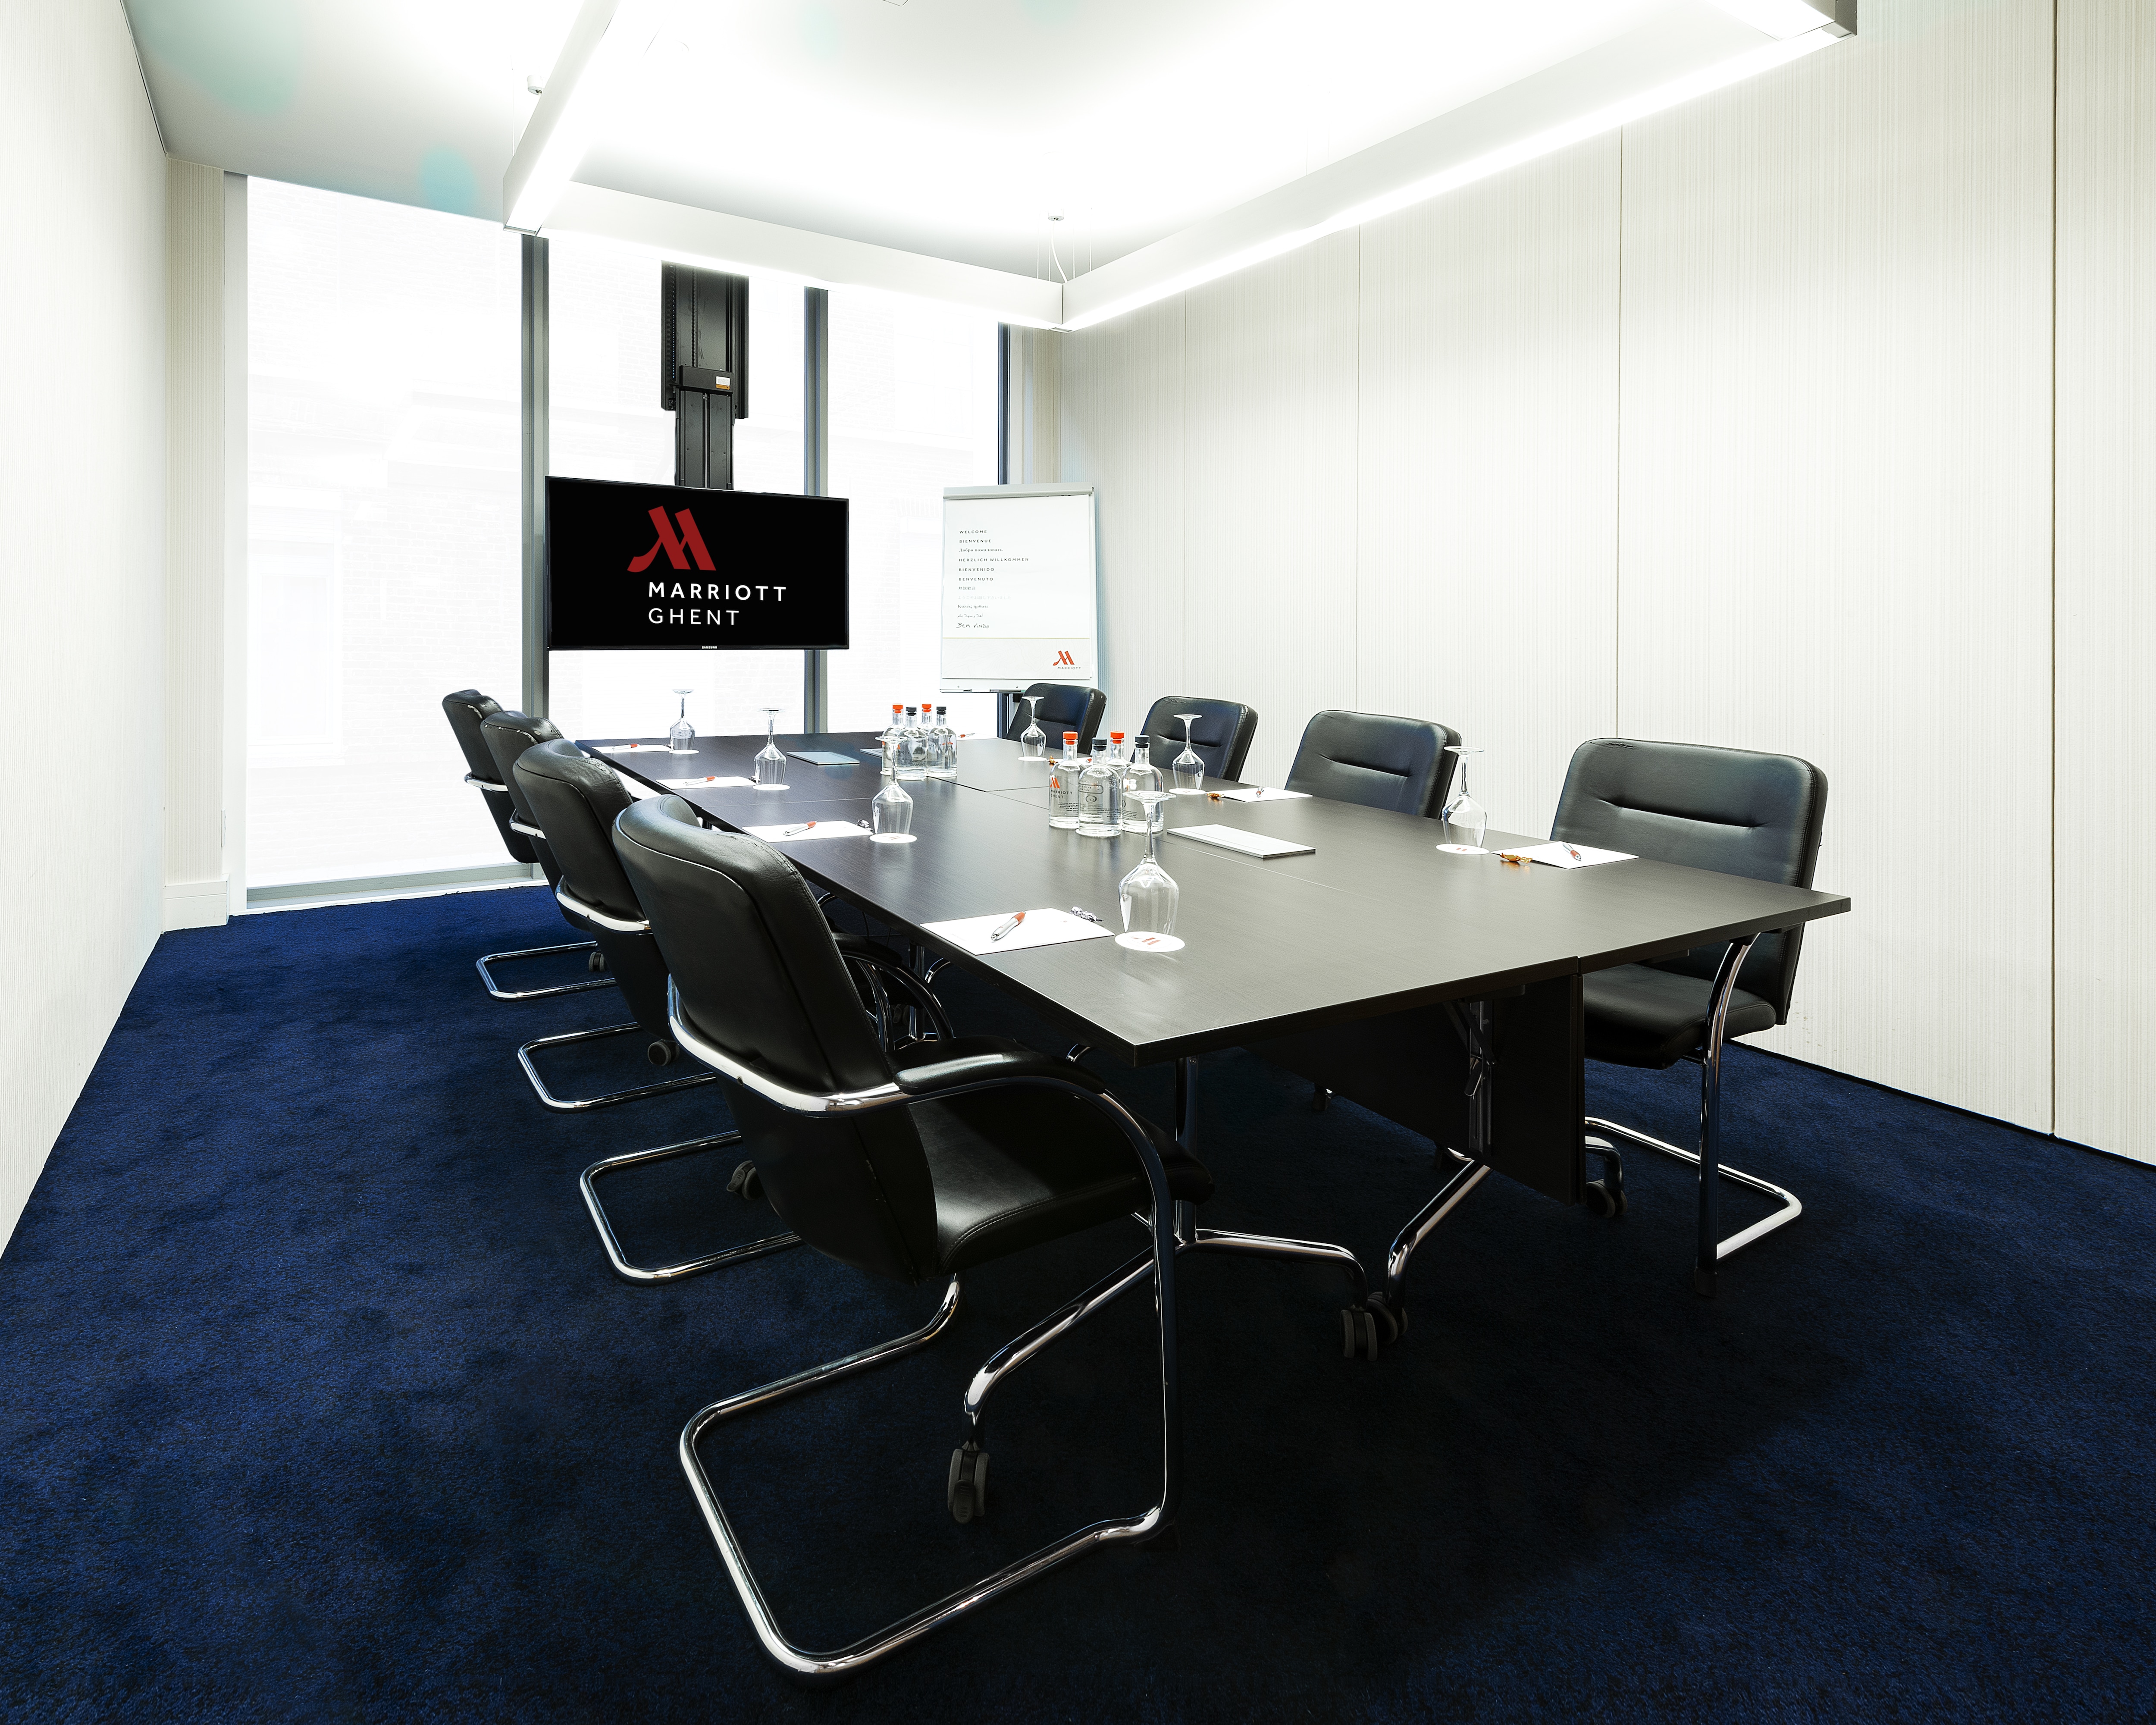 Breakout Rooms and Meetings